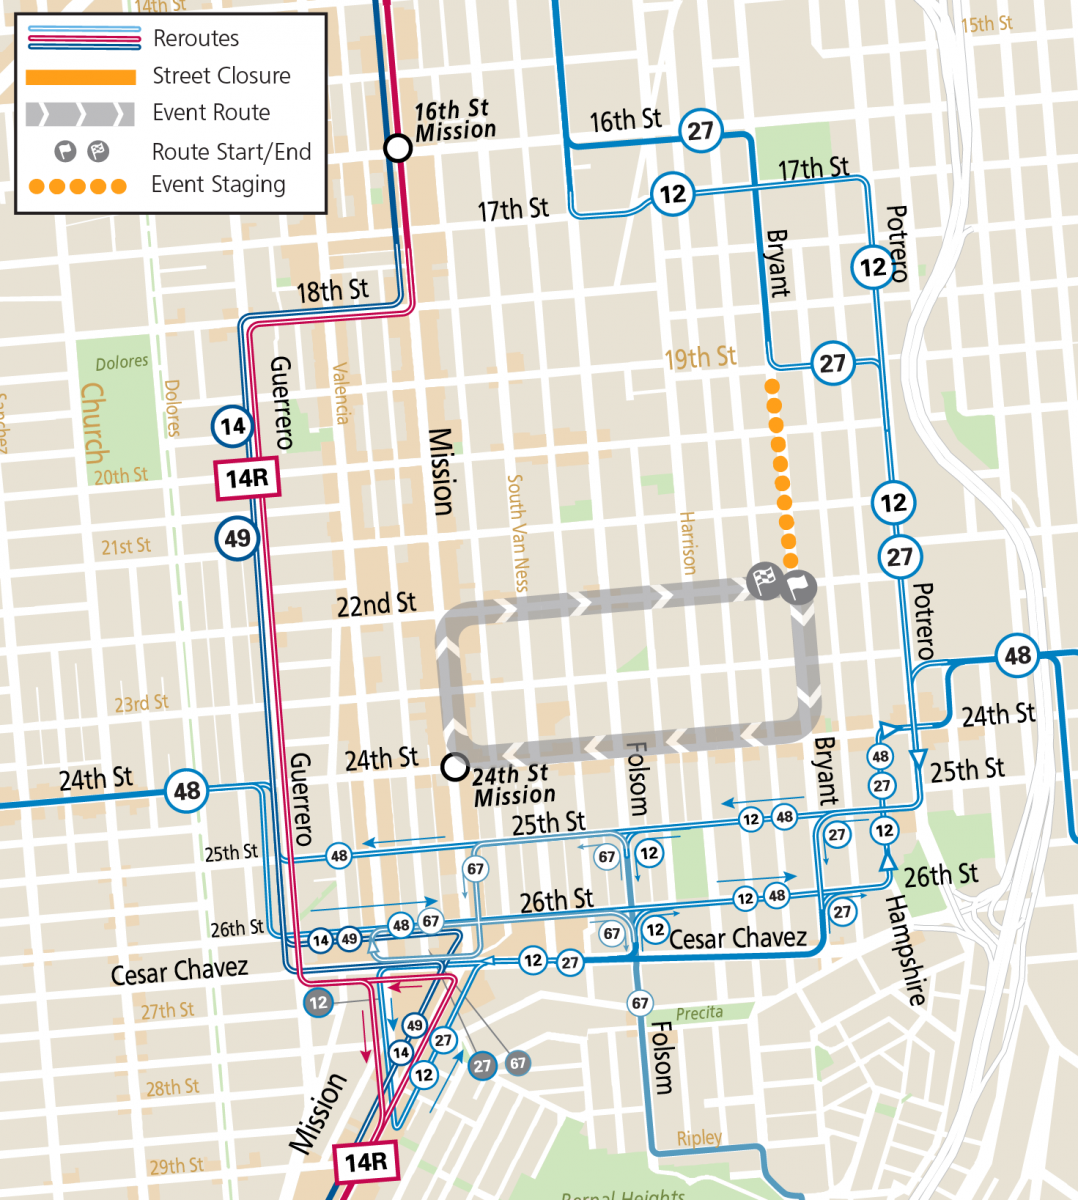 Map showing the Muni reroutes and parade route for the Dia de las Muertos Peocession